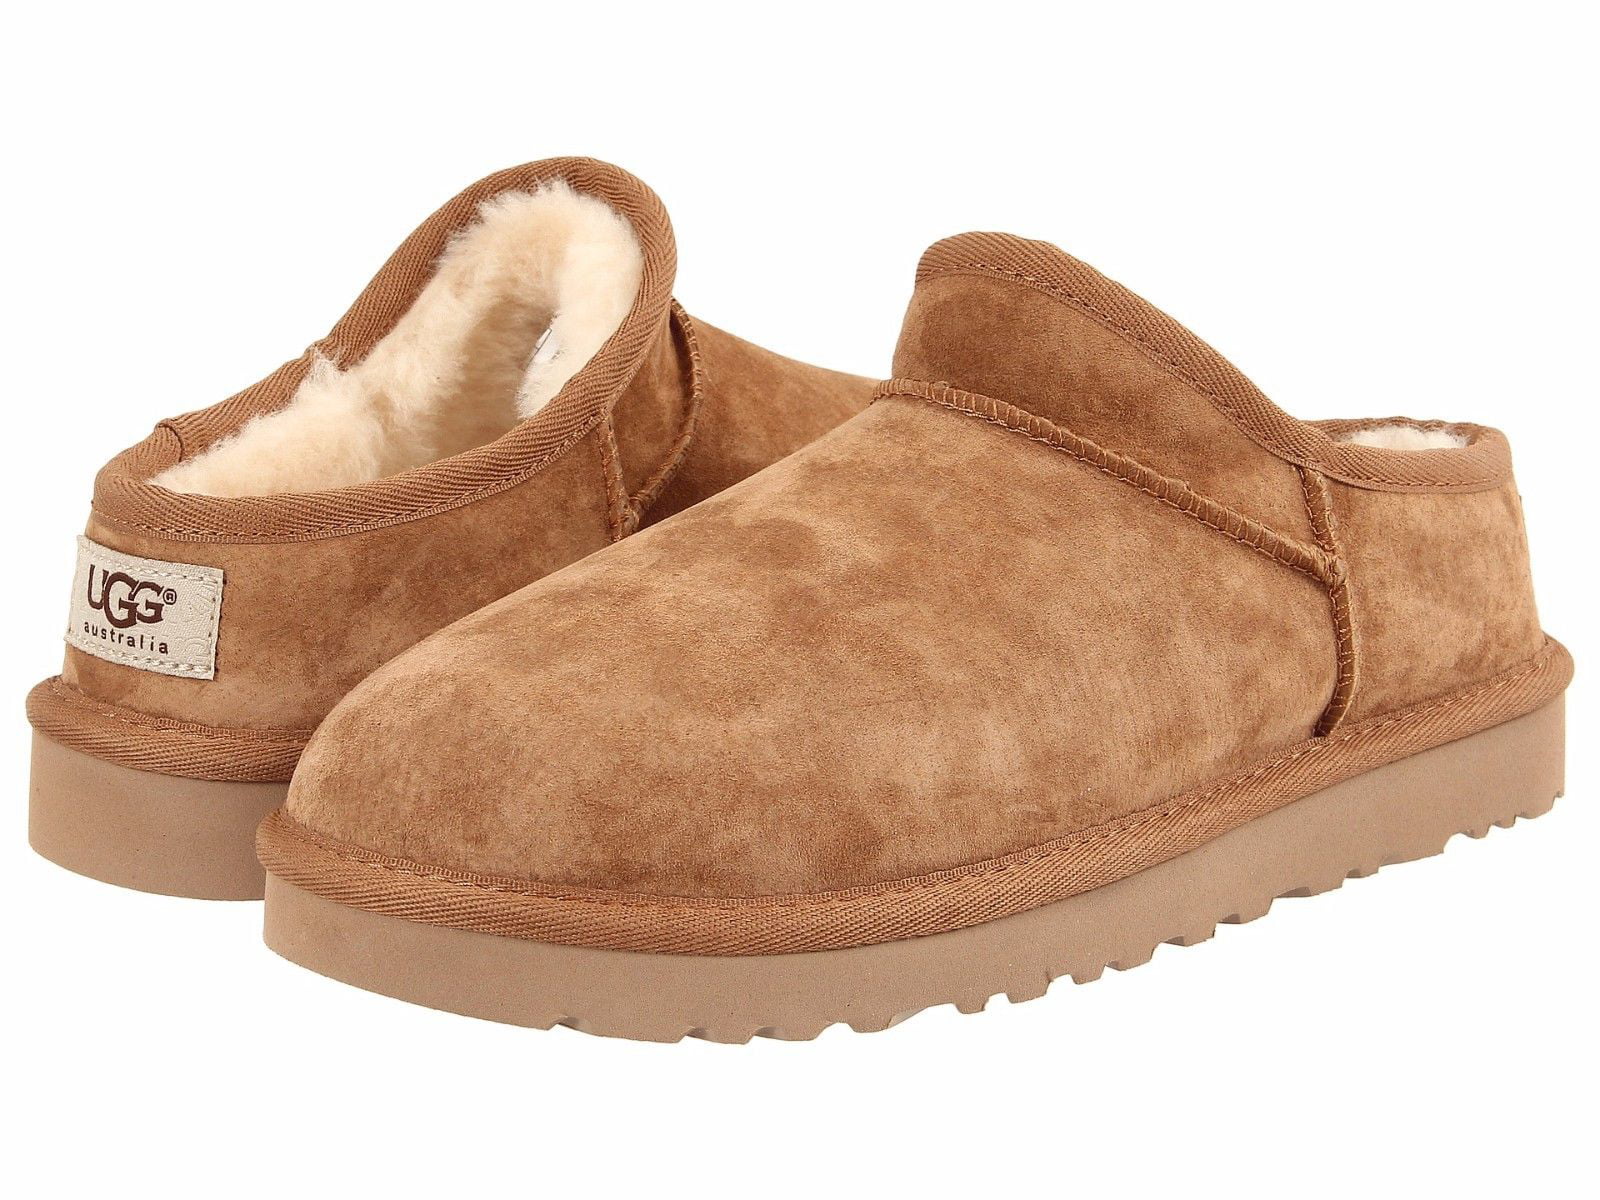 ugg slippers for women on sale